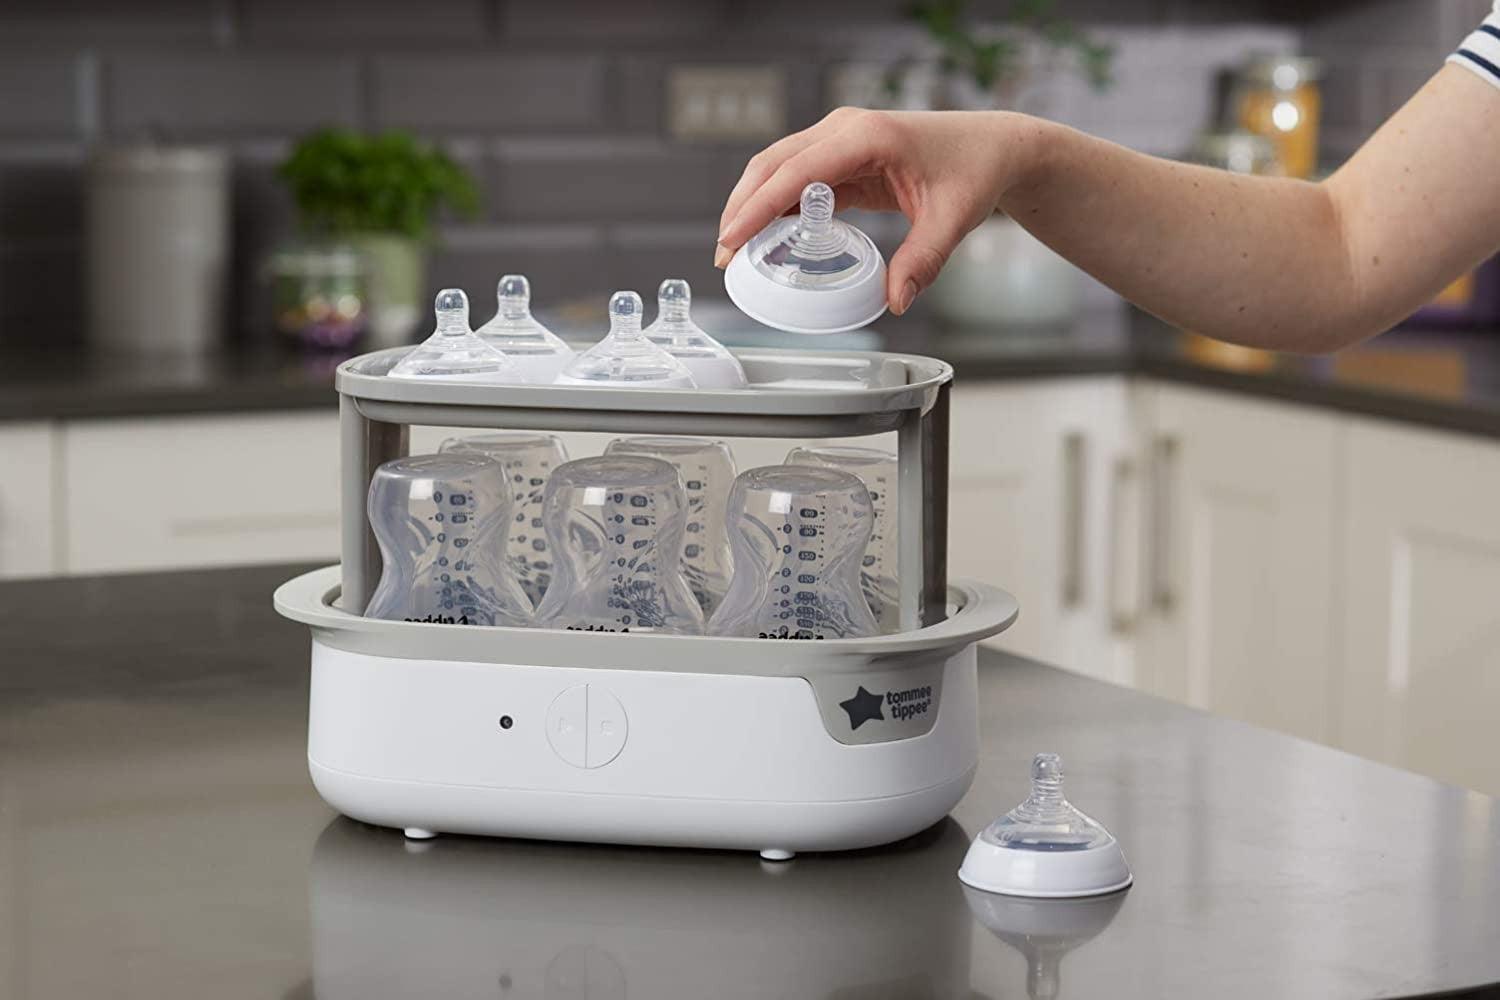 Tommee Tippee Closer to Nature Complete Feeding Set, Reviews